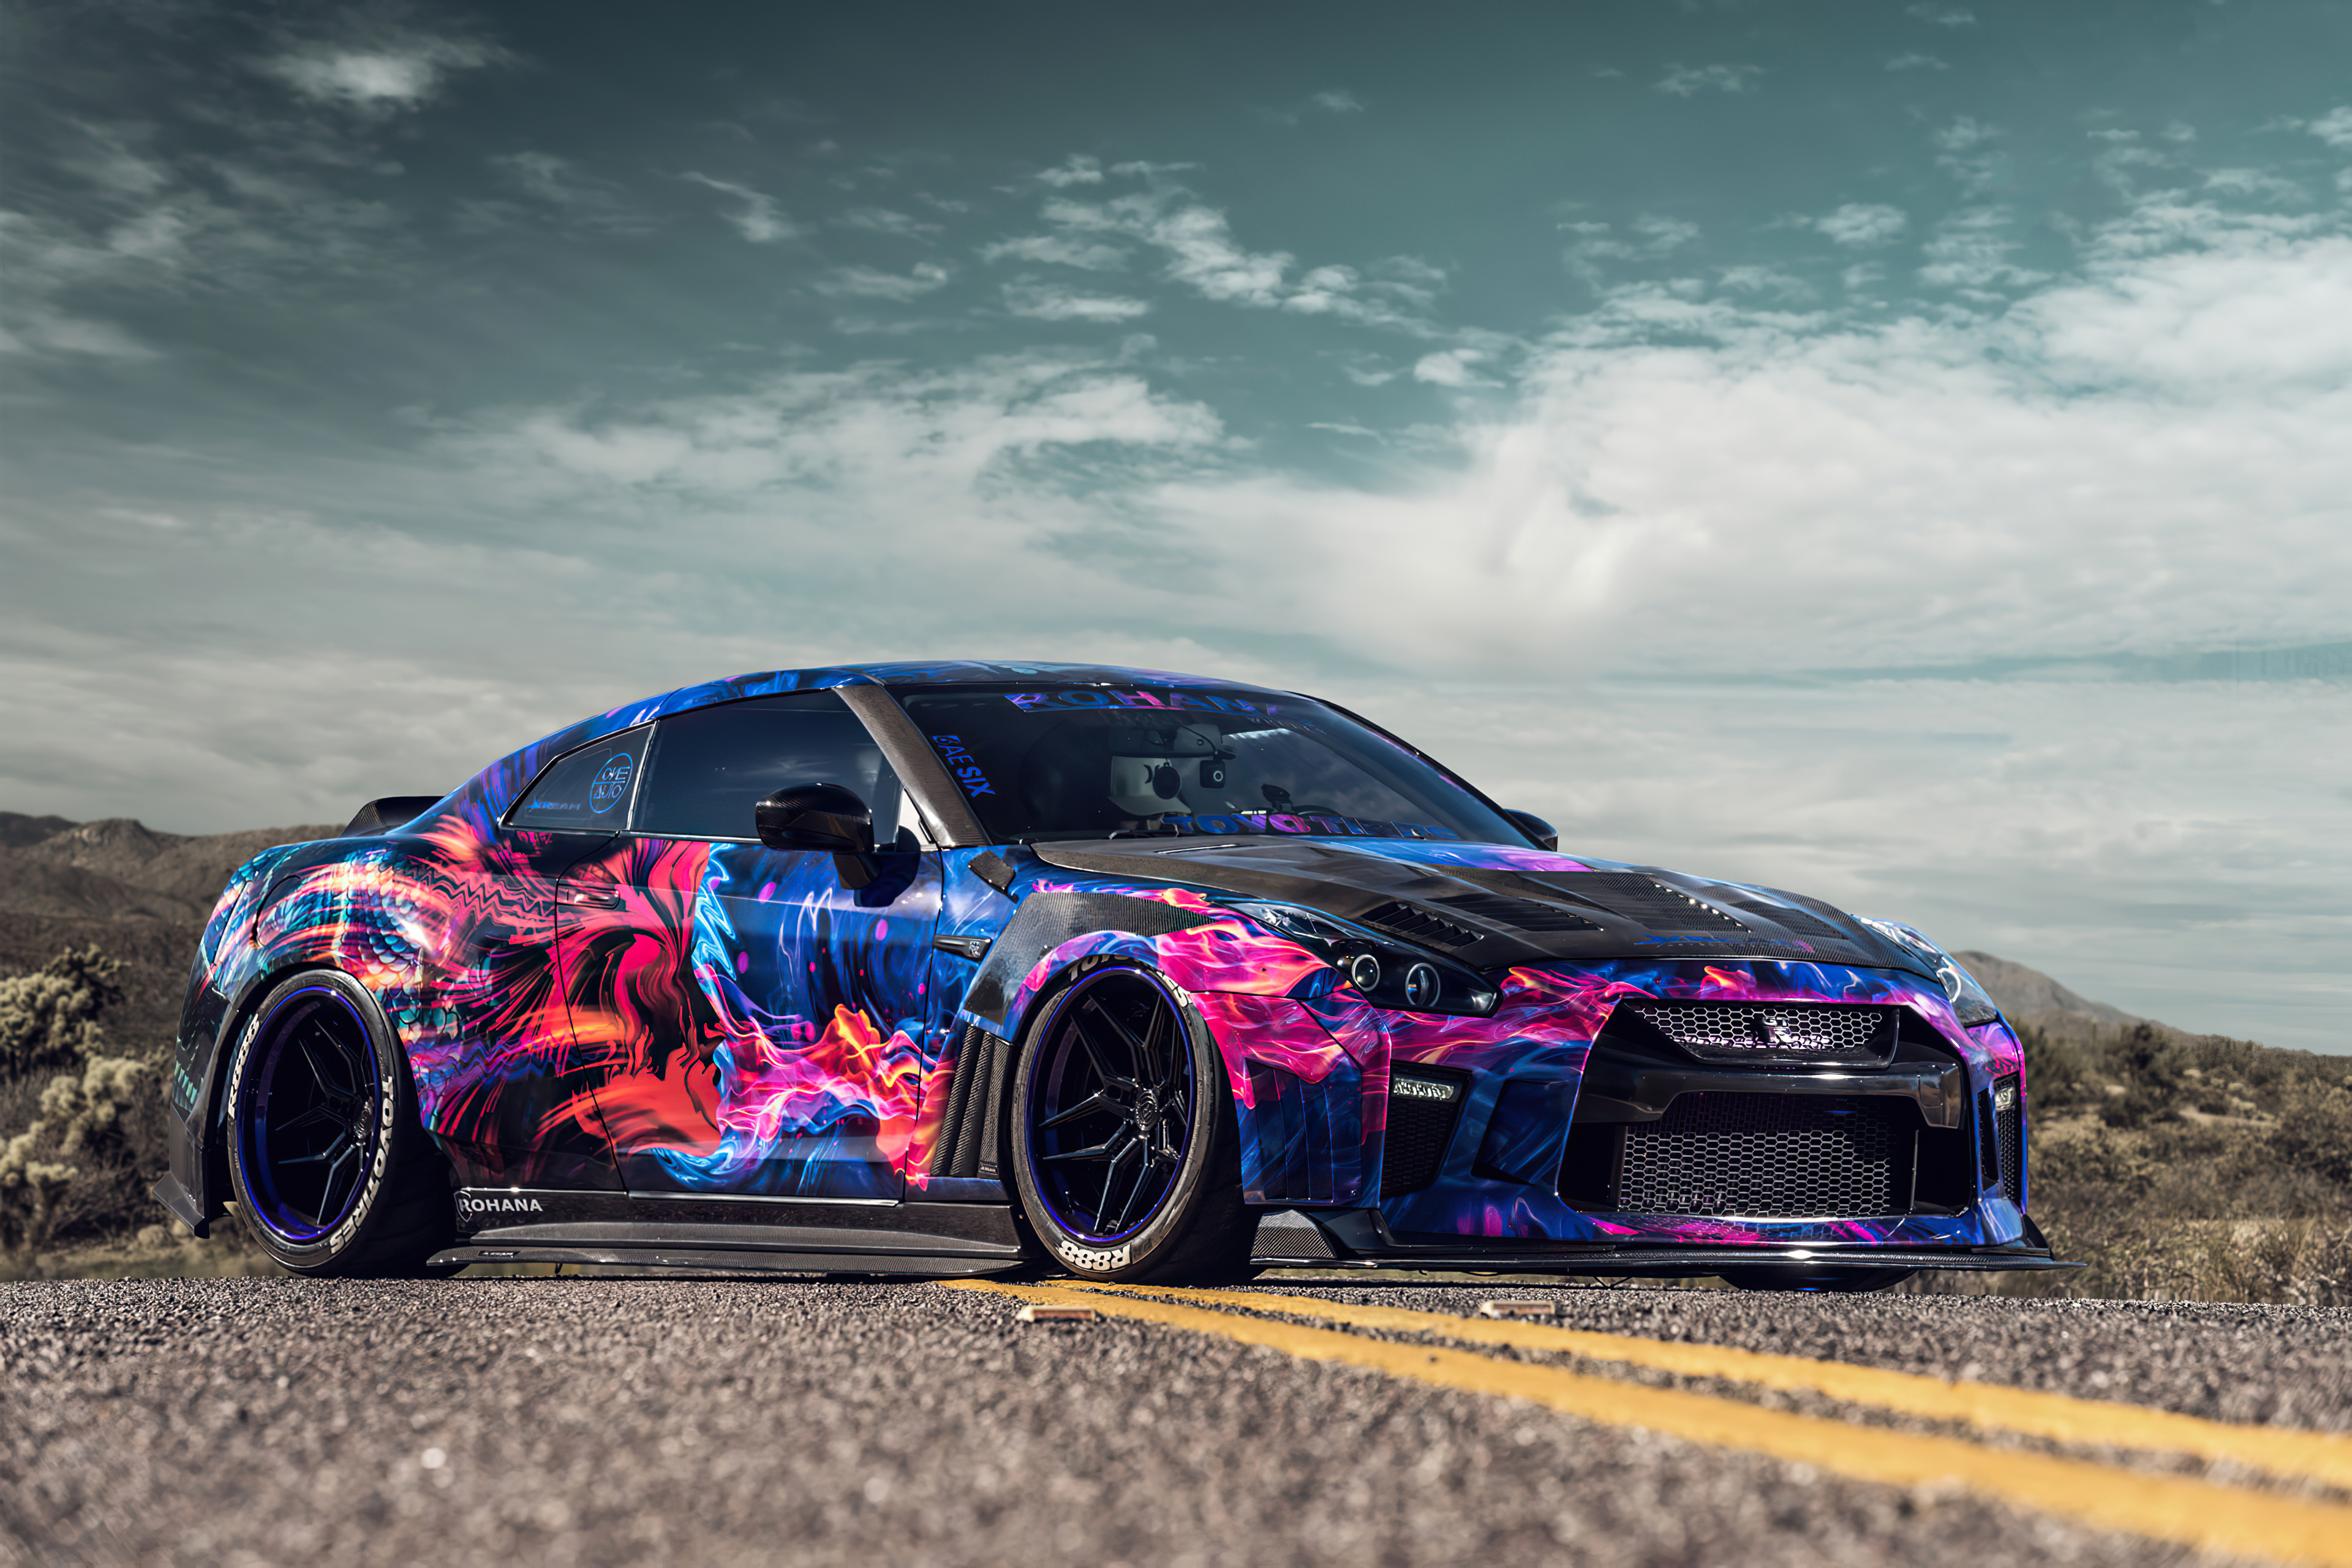 Wallpaper with Nissan GTR in cool coloring on the desktop